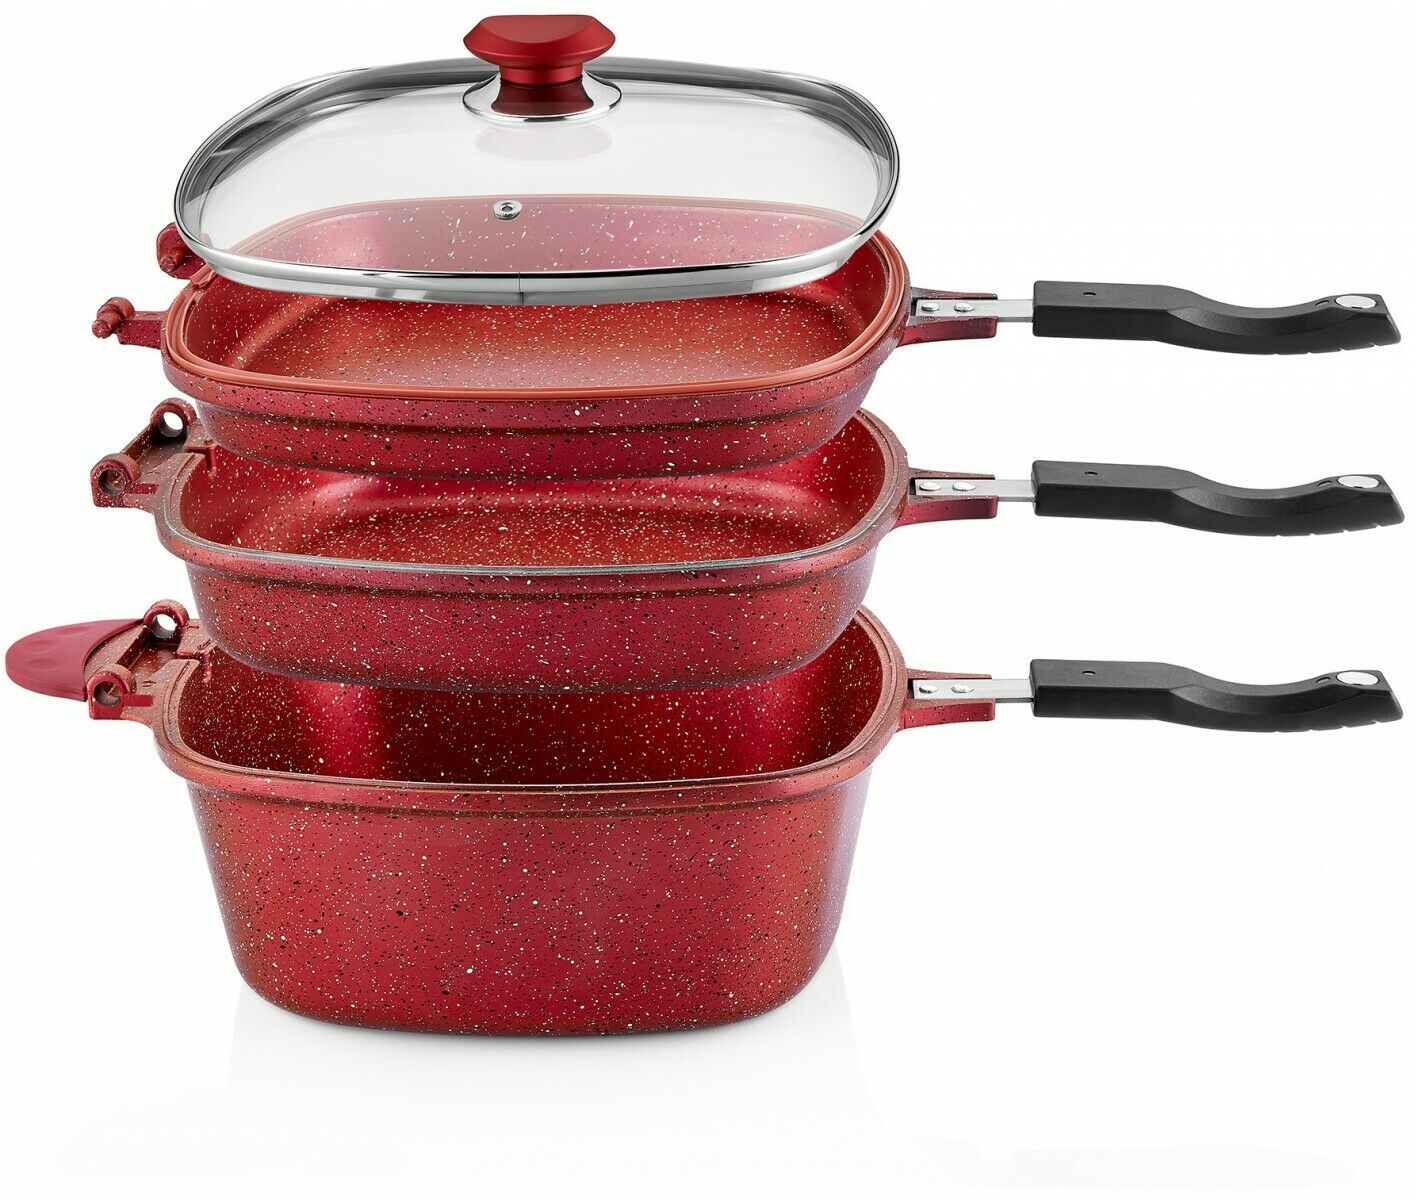 O.M.S. 7 Pc Granite Multi Cooker Cookware Pan Set Grill Deep Fry S/Steel Red